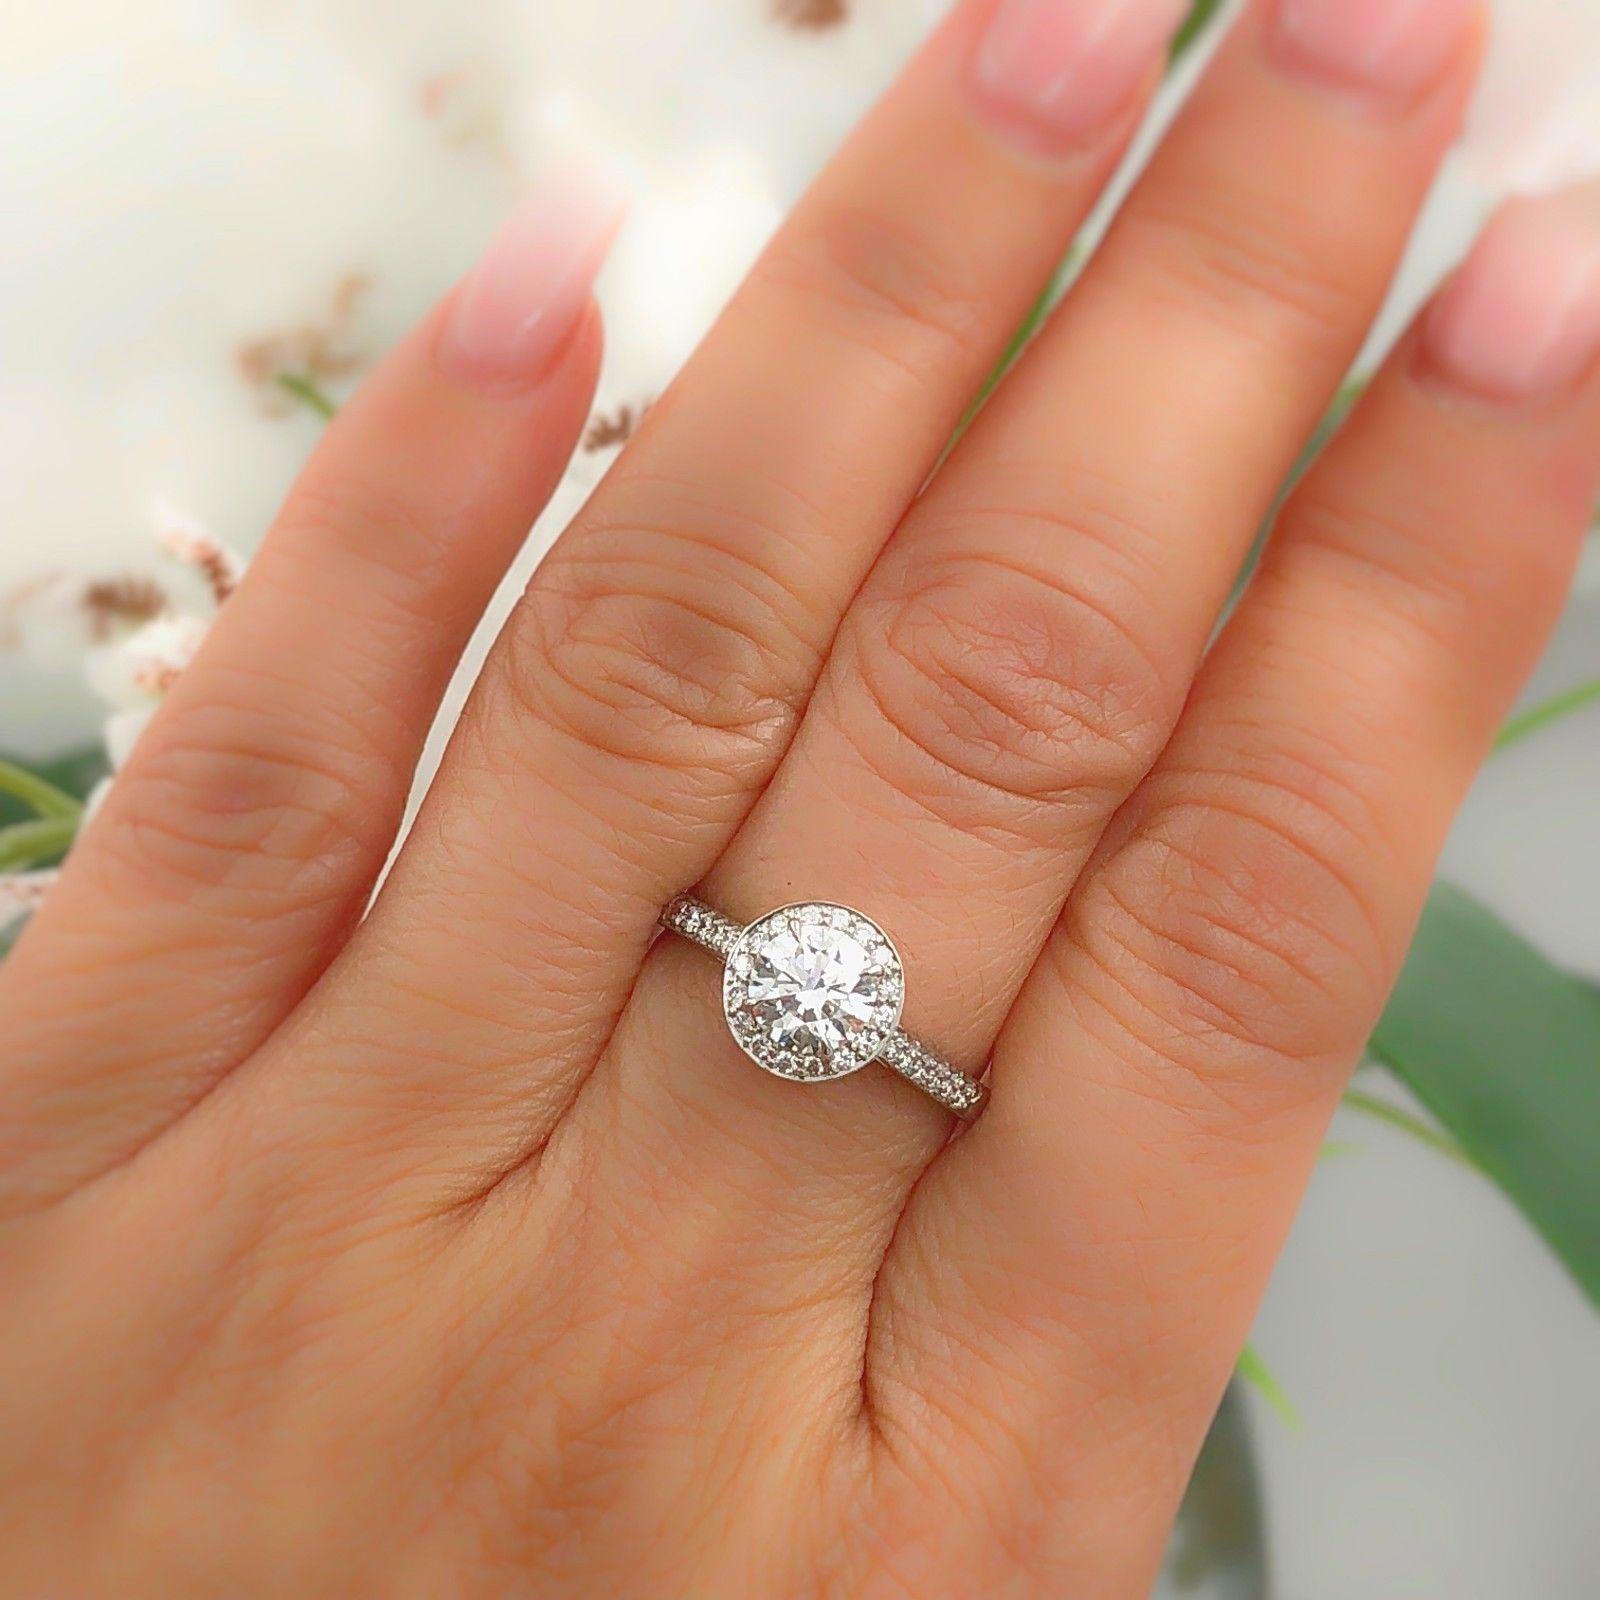 Tiffany & Co.
Style:  Embrace Diamond Engagement Ring
Serial Number:  27090443 / L07270282
Metal:  Platinum PT950
Size:  6.25 - sizable
Total Carat Weight:  1.10 tcw
Diamond Shape:  Round Brilliant 0.88 cts
Diamond Color & Clarity:  E color, IF